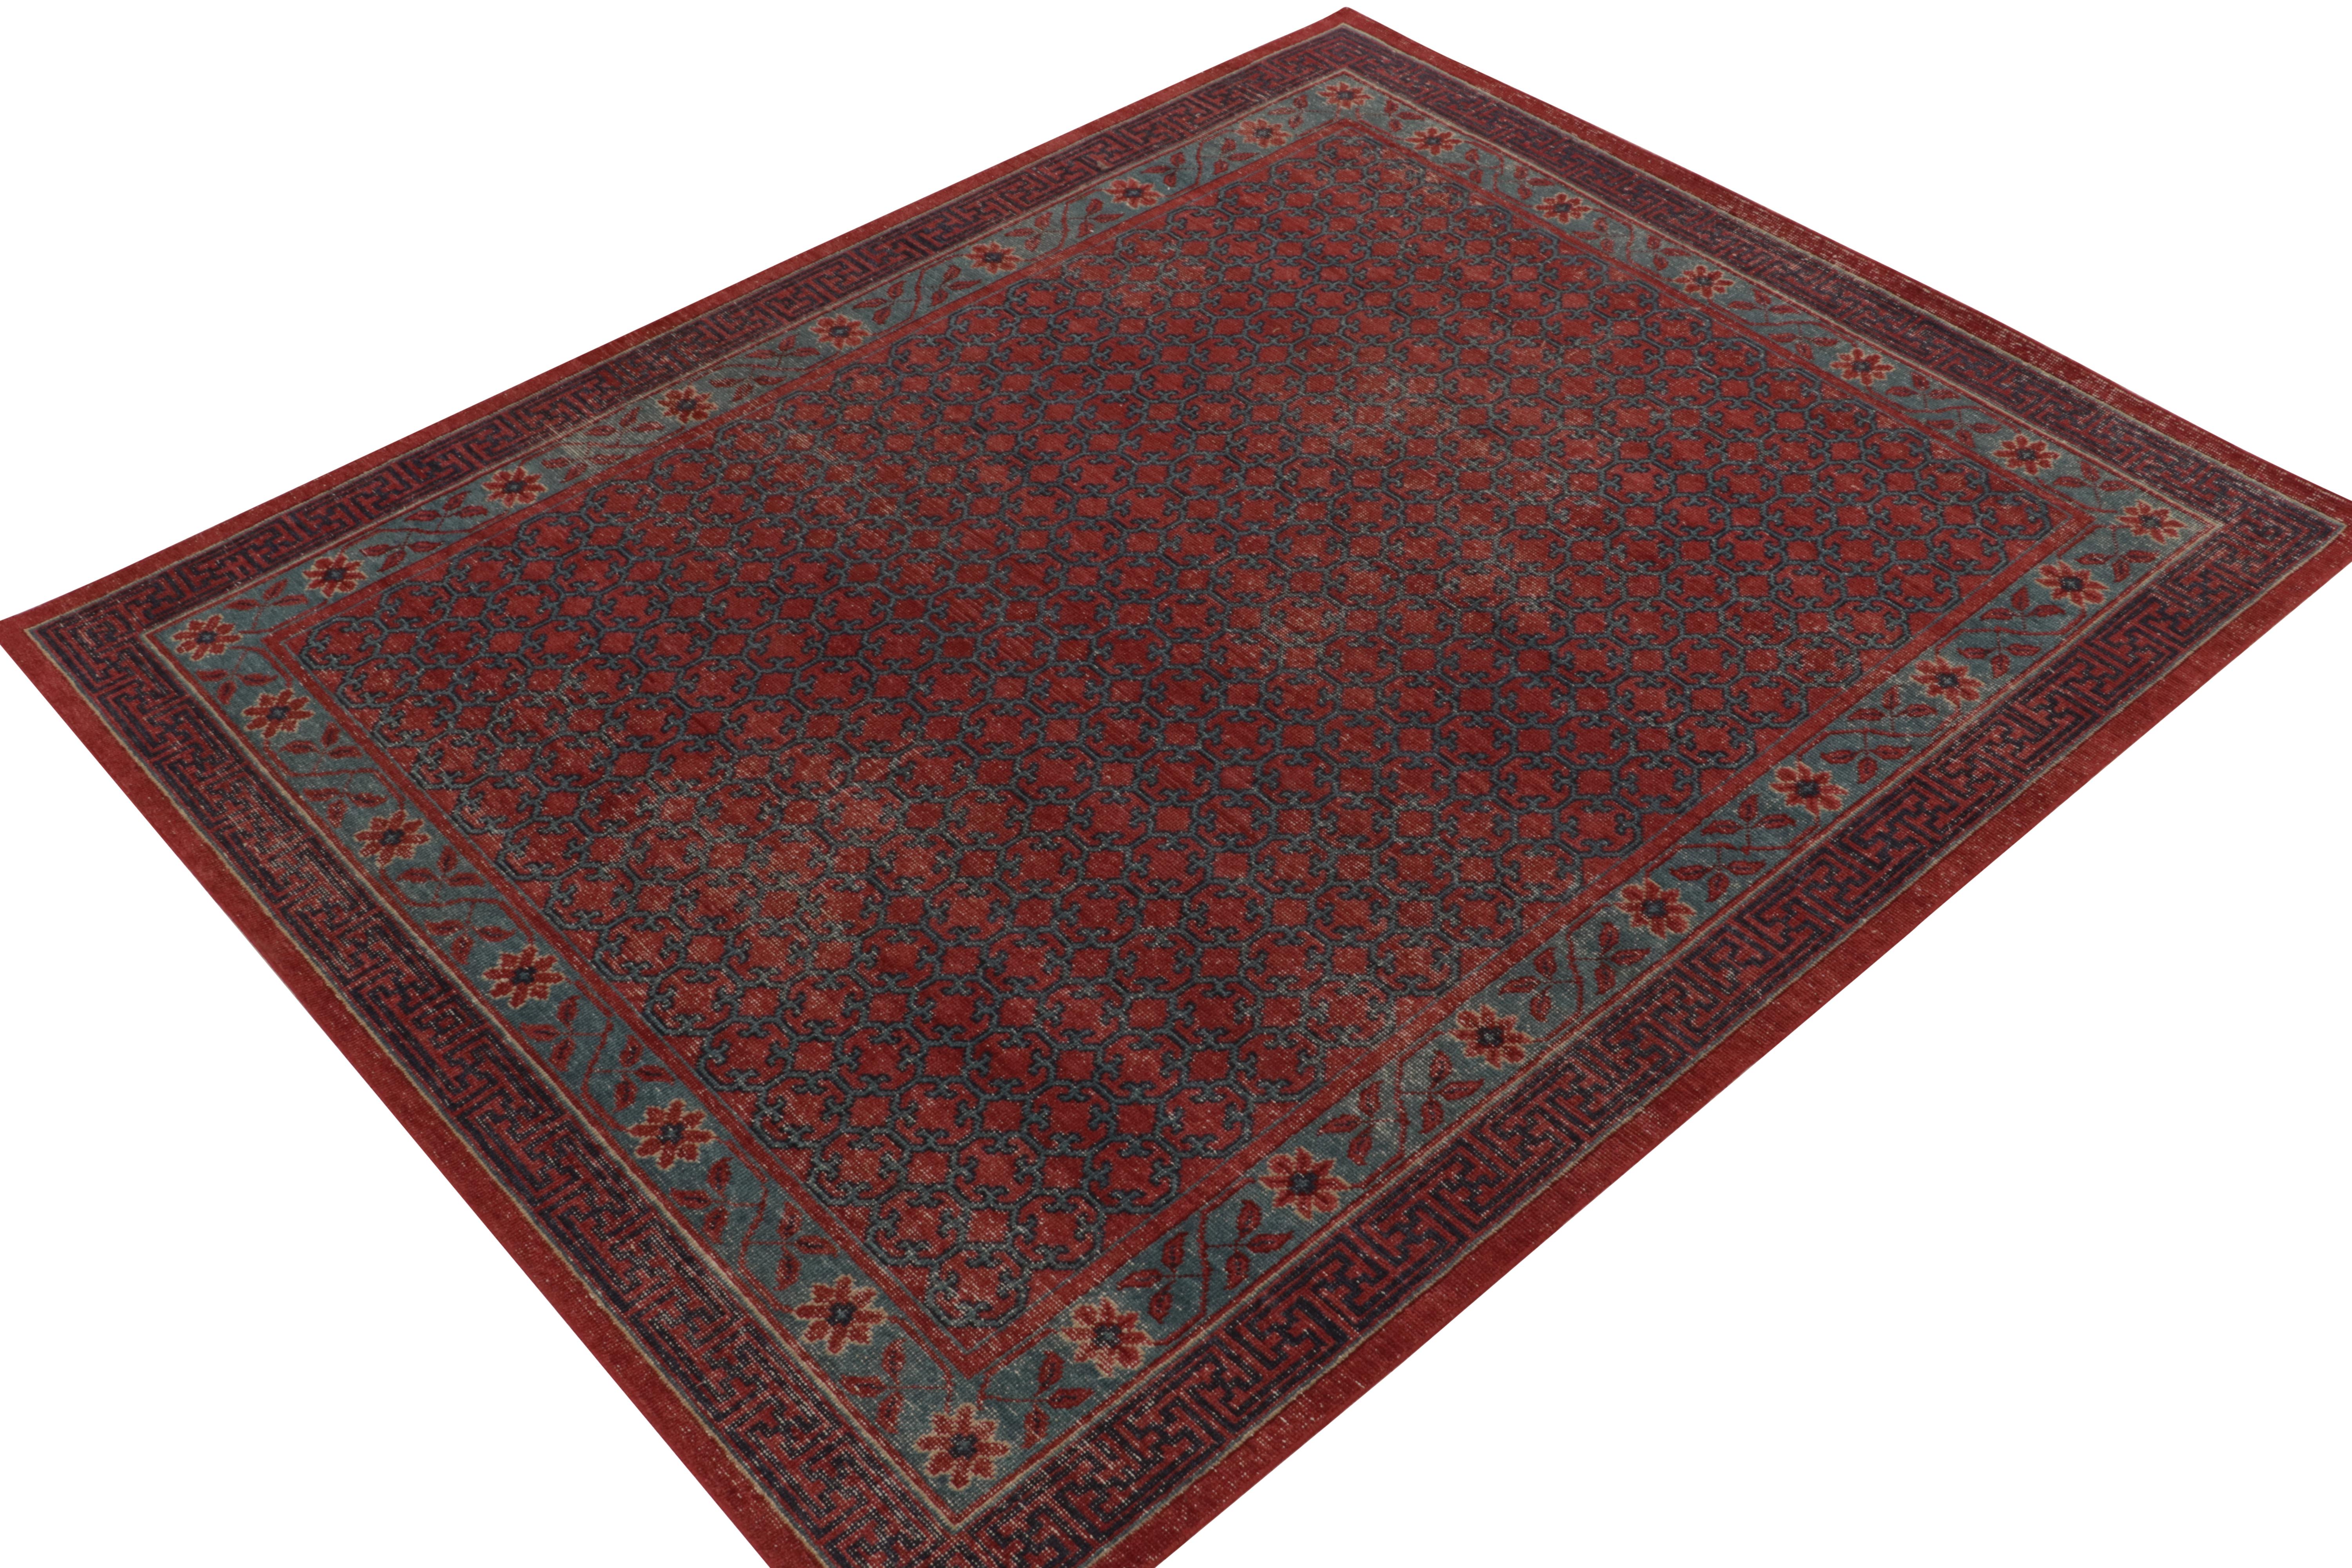 An elegant 8x10 hand-knotted wool rug from Rug & Kilim’s Homage Collection—a bold textural encyclopedia of celebrated patterns and styles. 

This classic style is inspired by antique Khotan Samarkand rugs of the early 20th century, reimagined in a